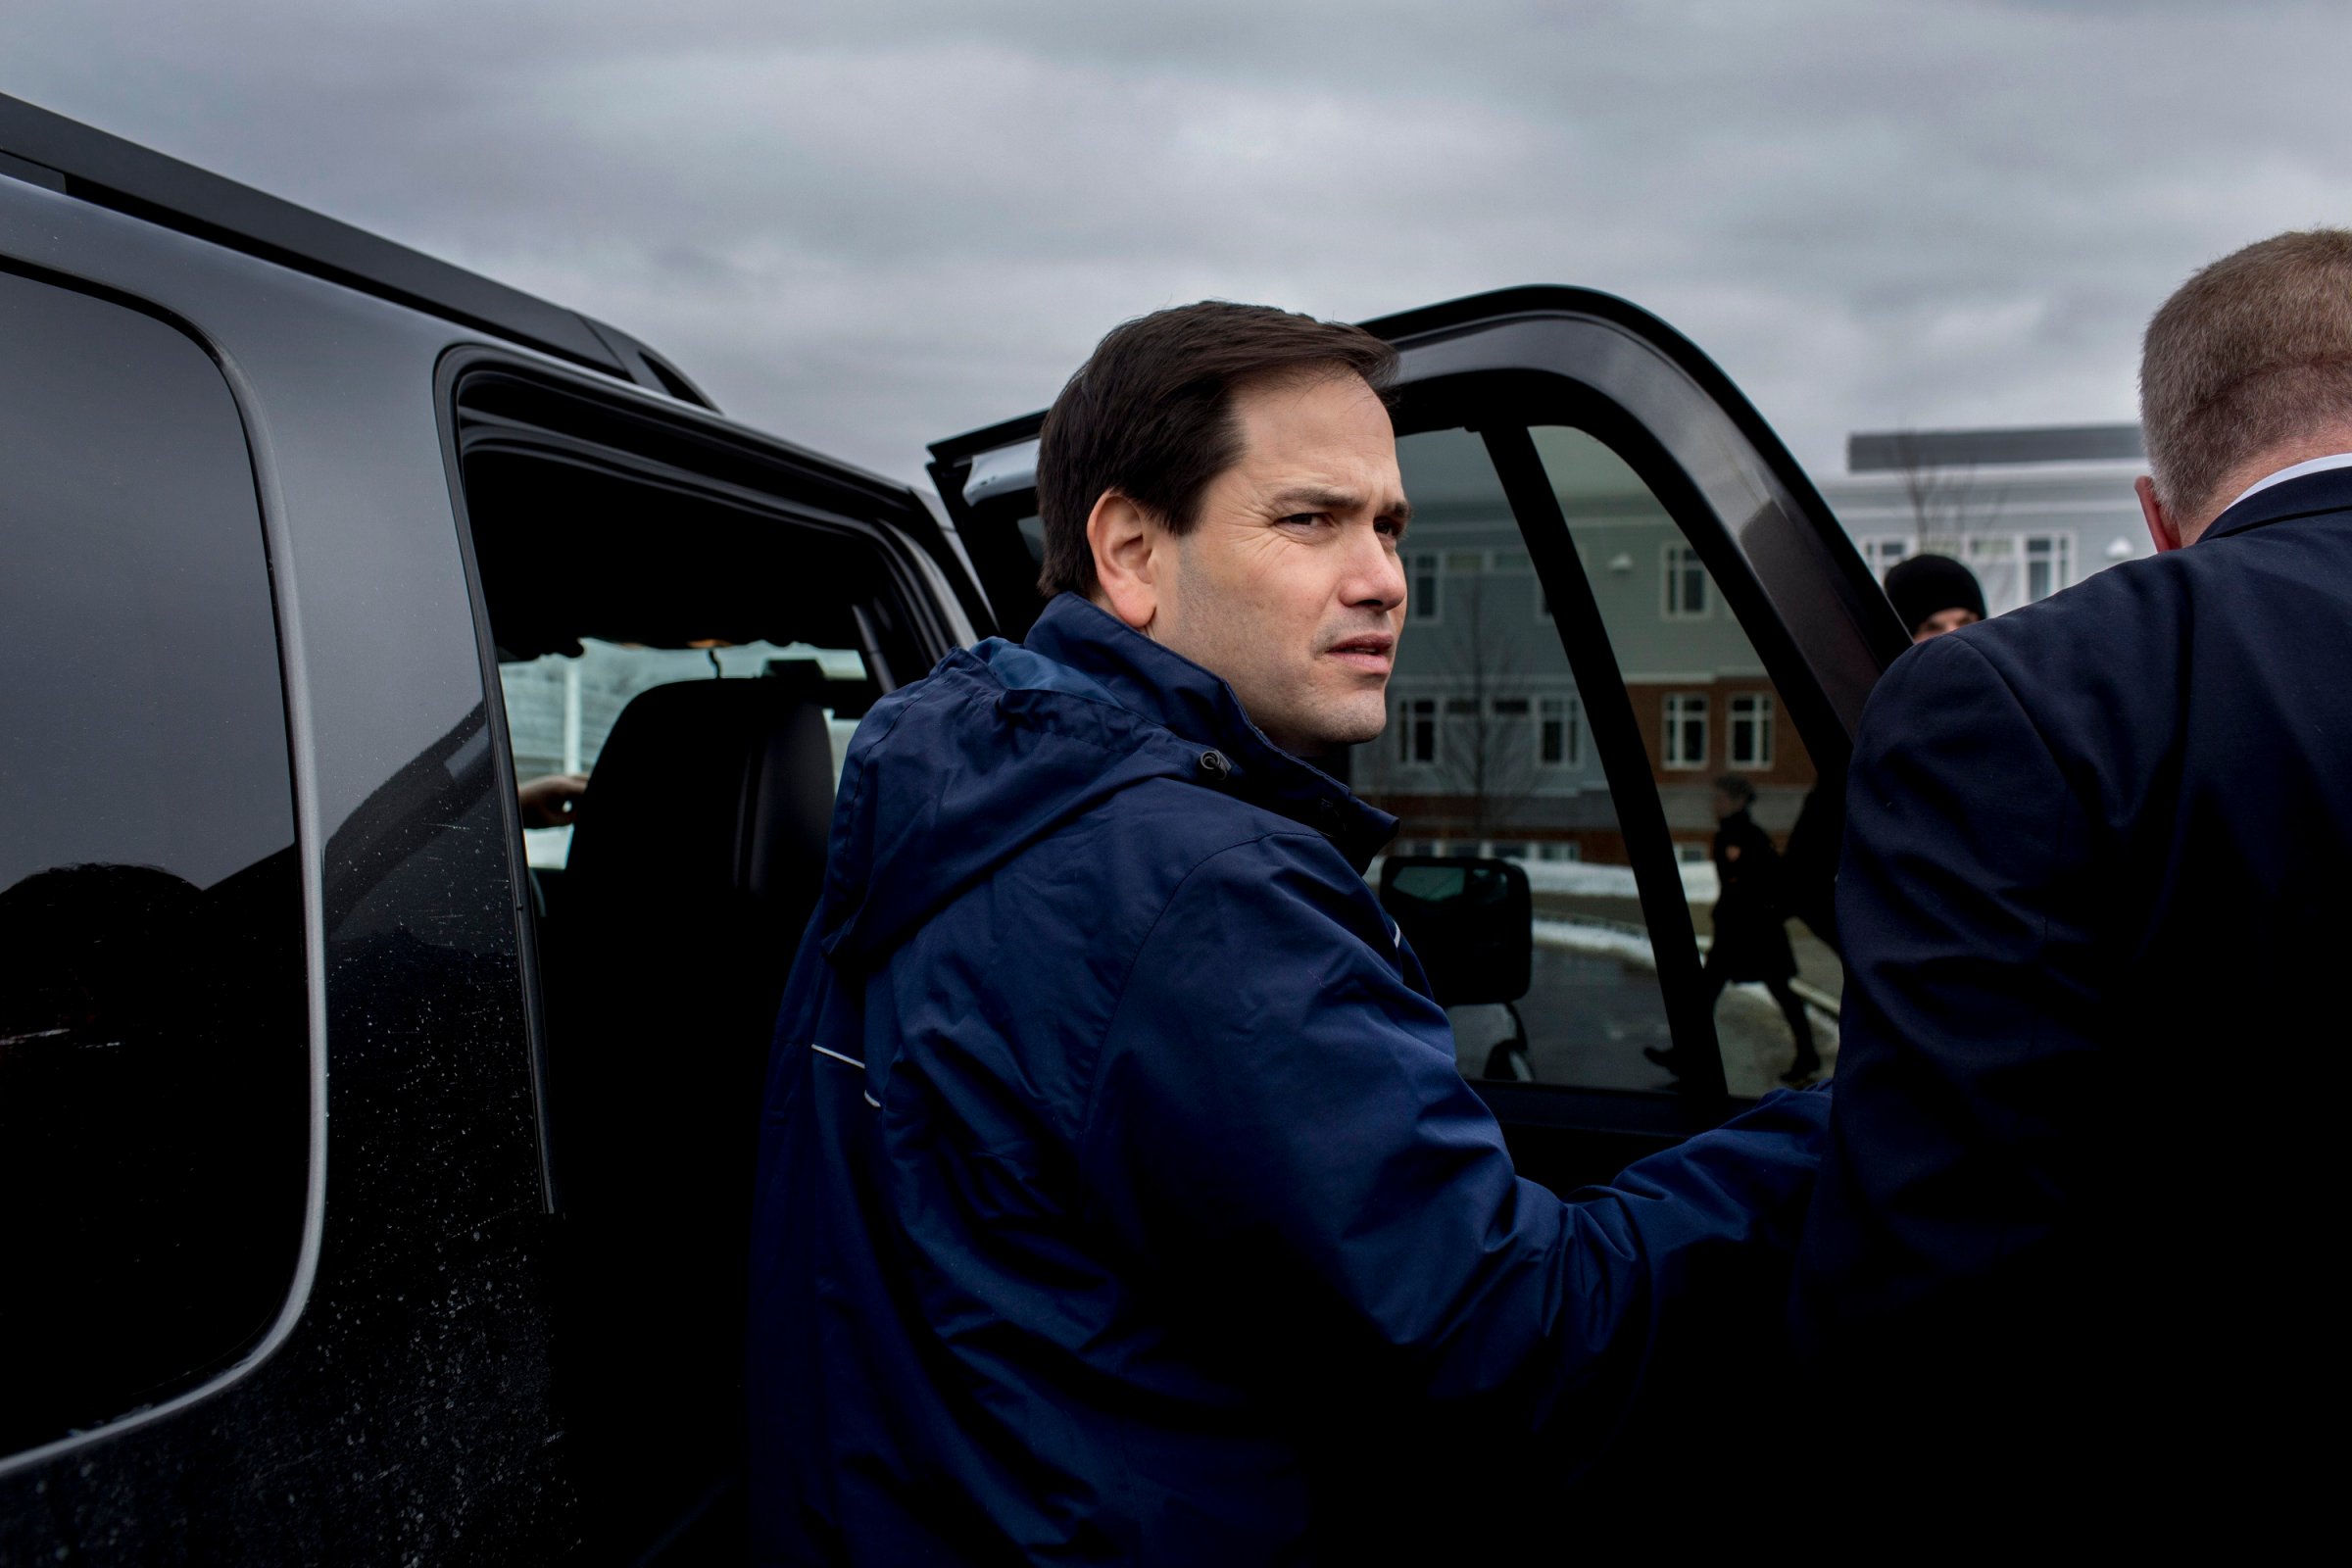 Presidential Candidate Marco Rubio made  a stop outside the polling place as New Hampshire residents voted at a polling station located at Windham Highschool on Feb. 9, 2016, in Windham N.H.